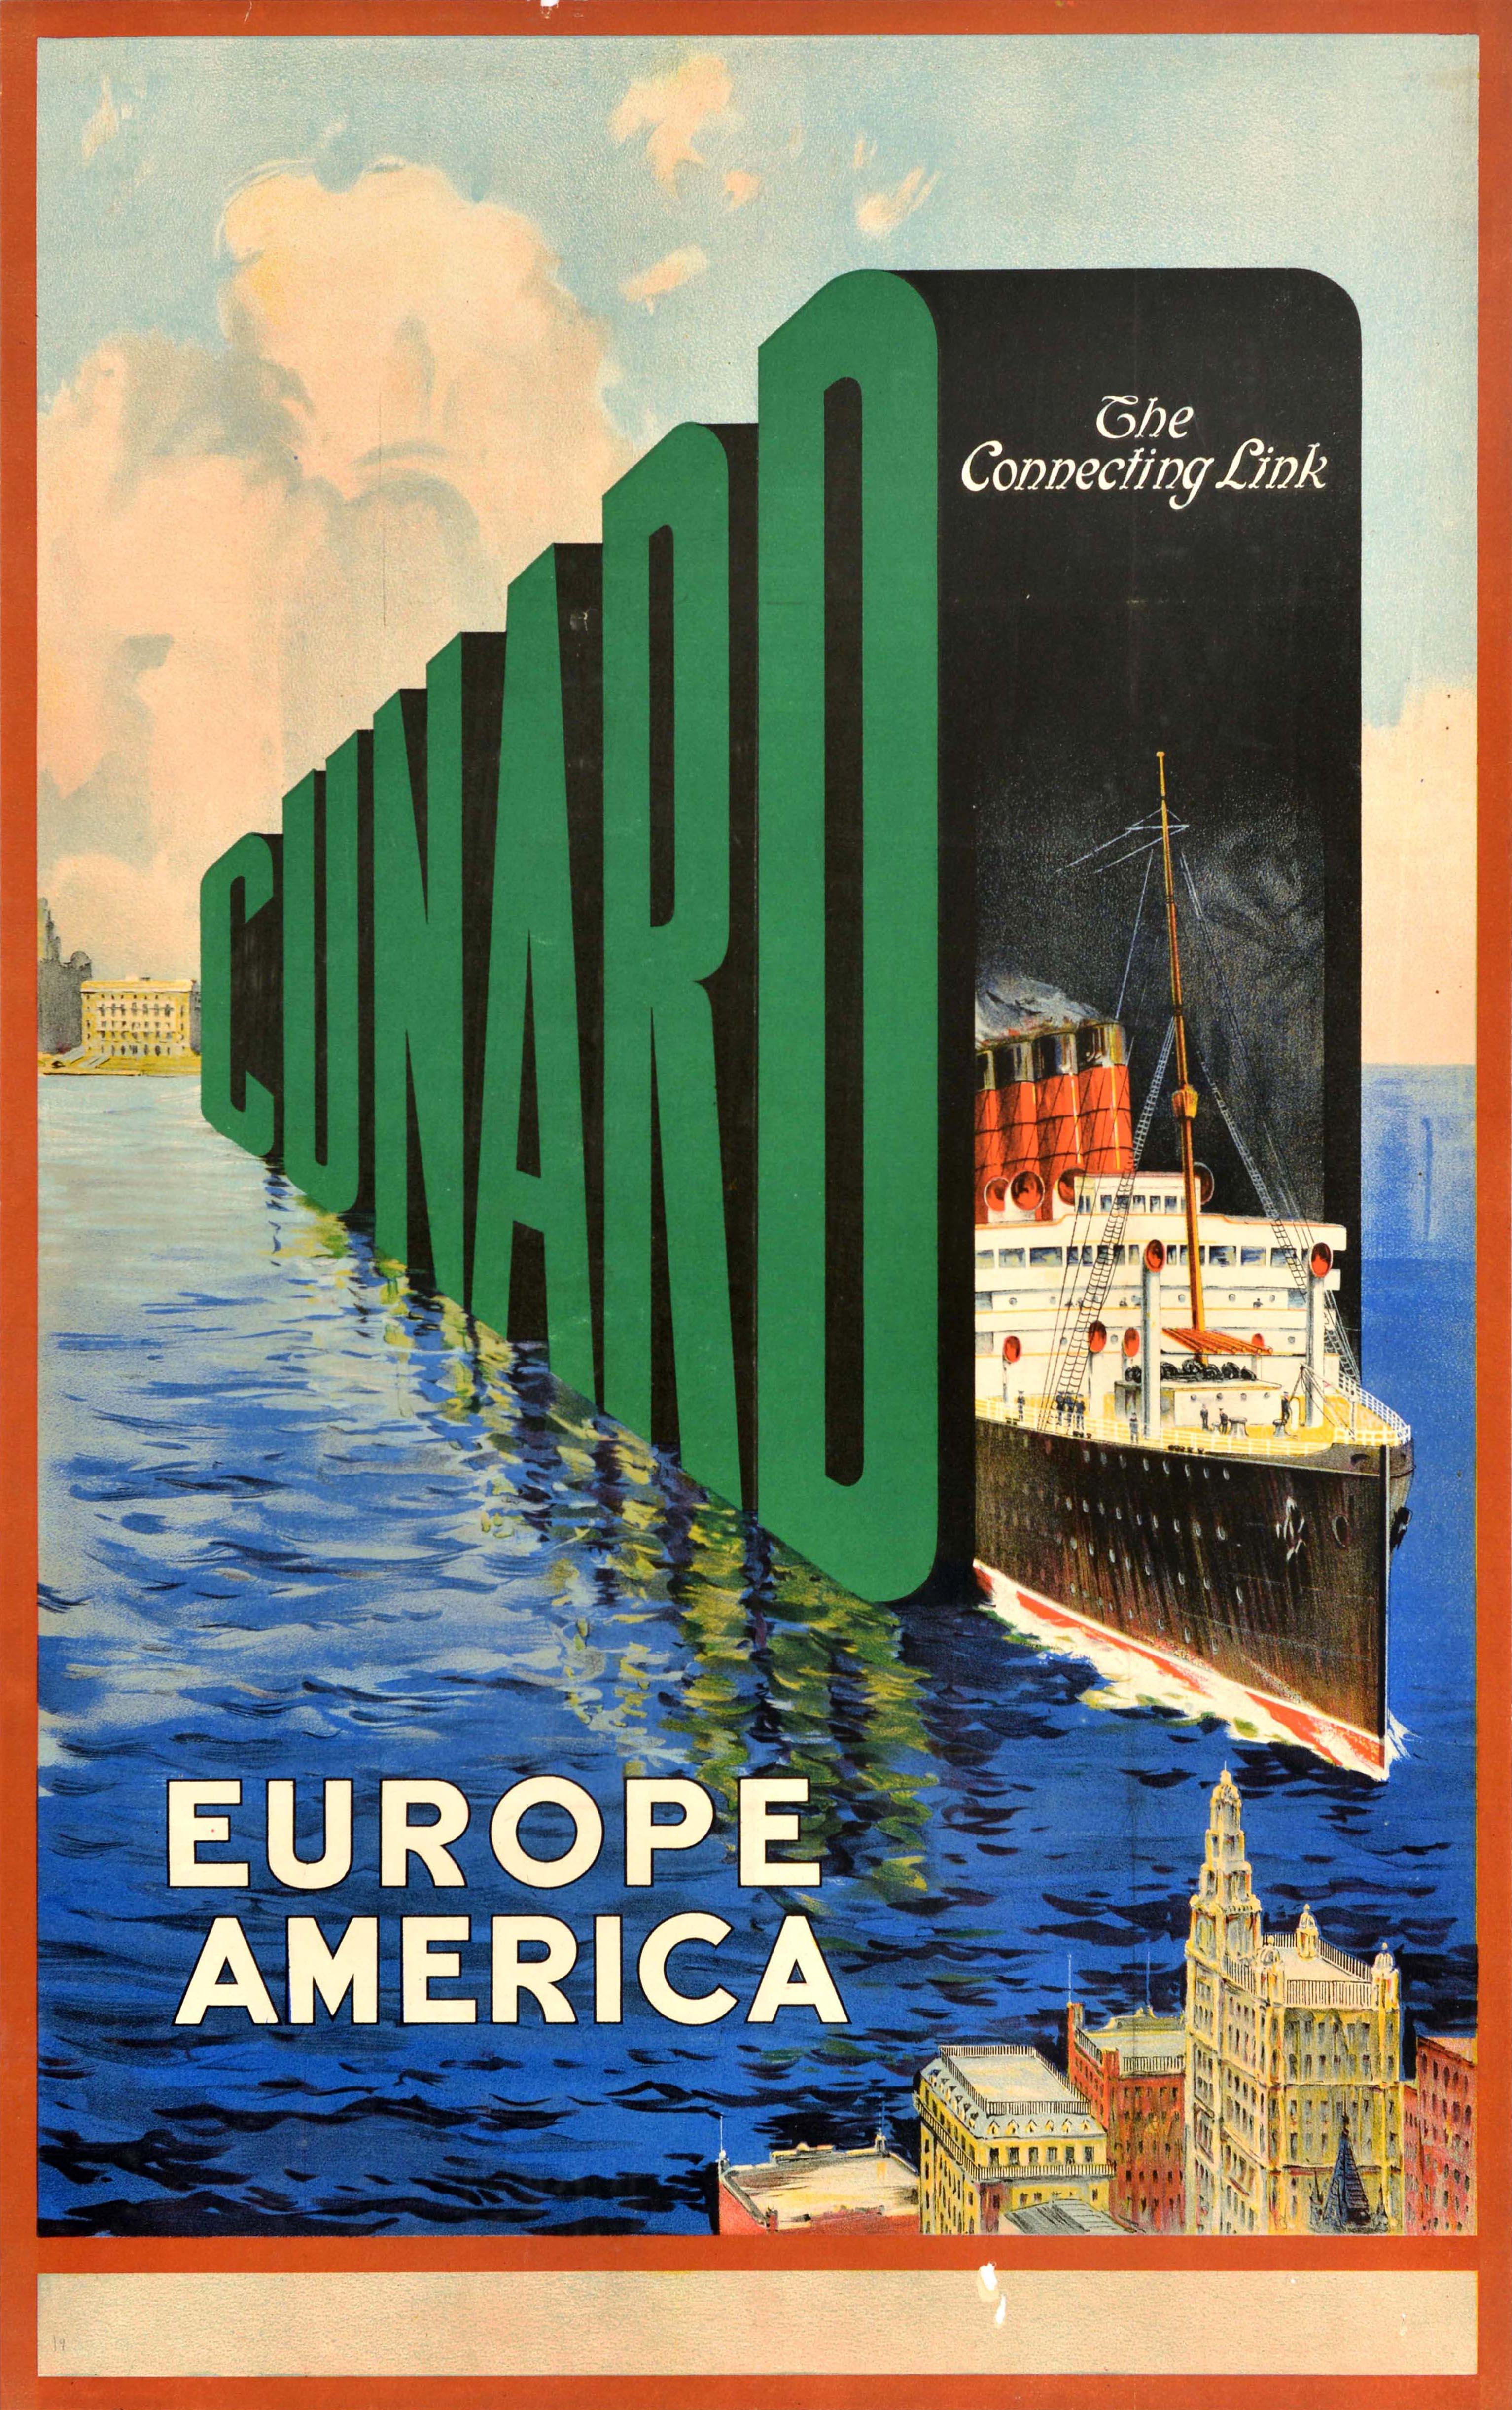 Unknown Print - Original Vintage Cruise Travel Poster Cunard The Connecting Link Europe America